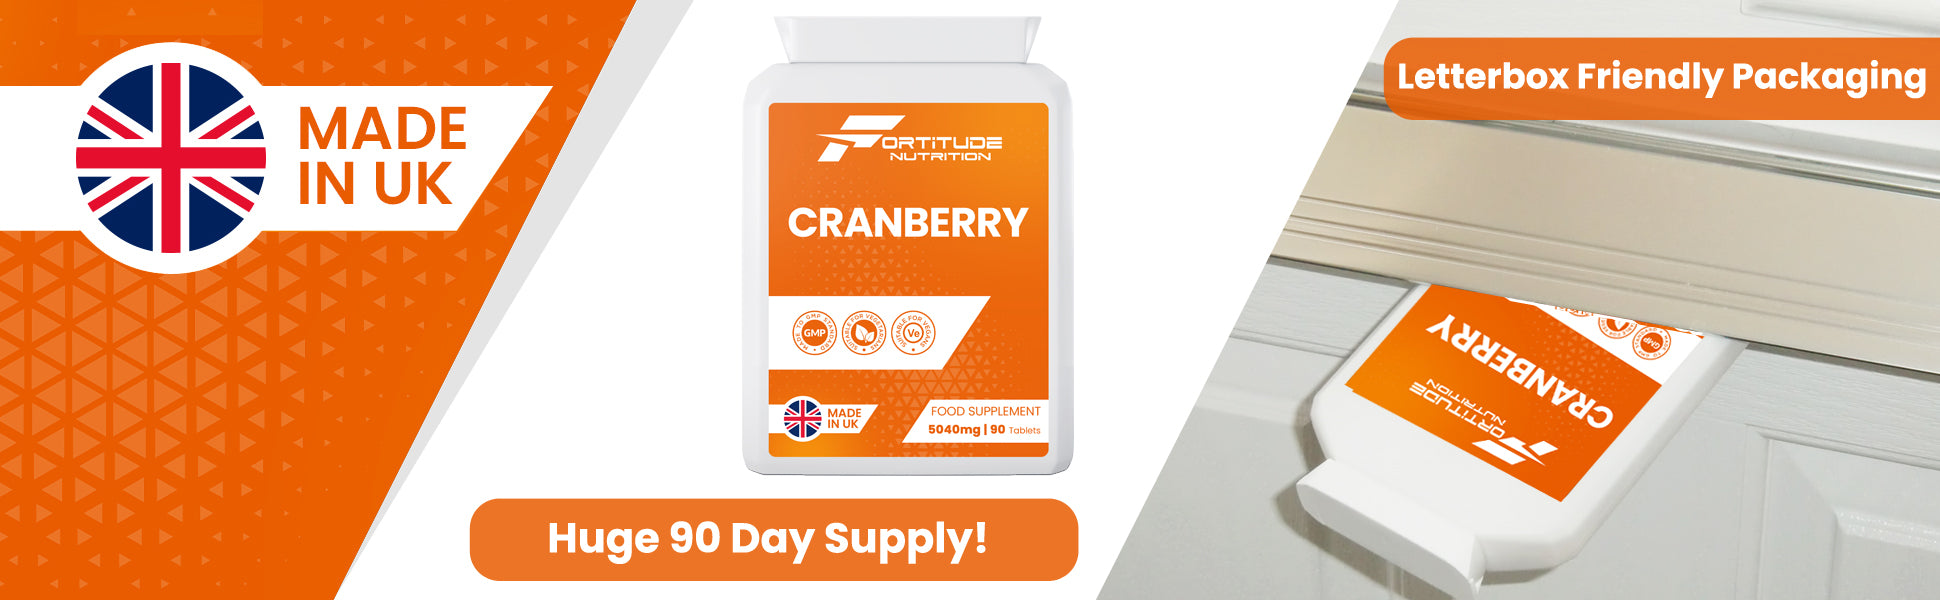 Cranberry Supplements In Letterbox Friendly Packaging